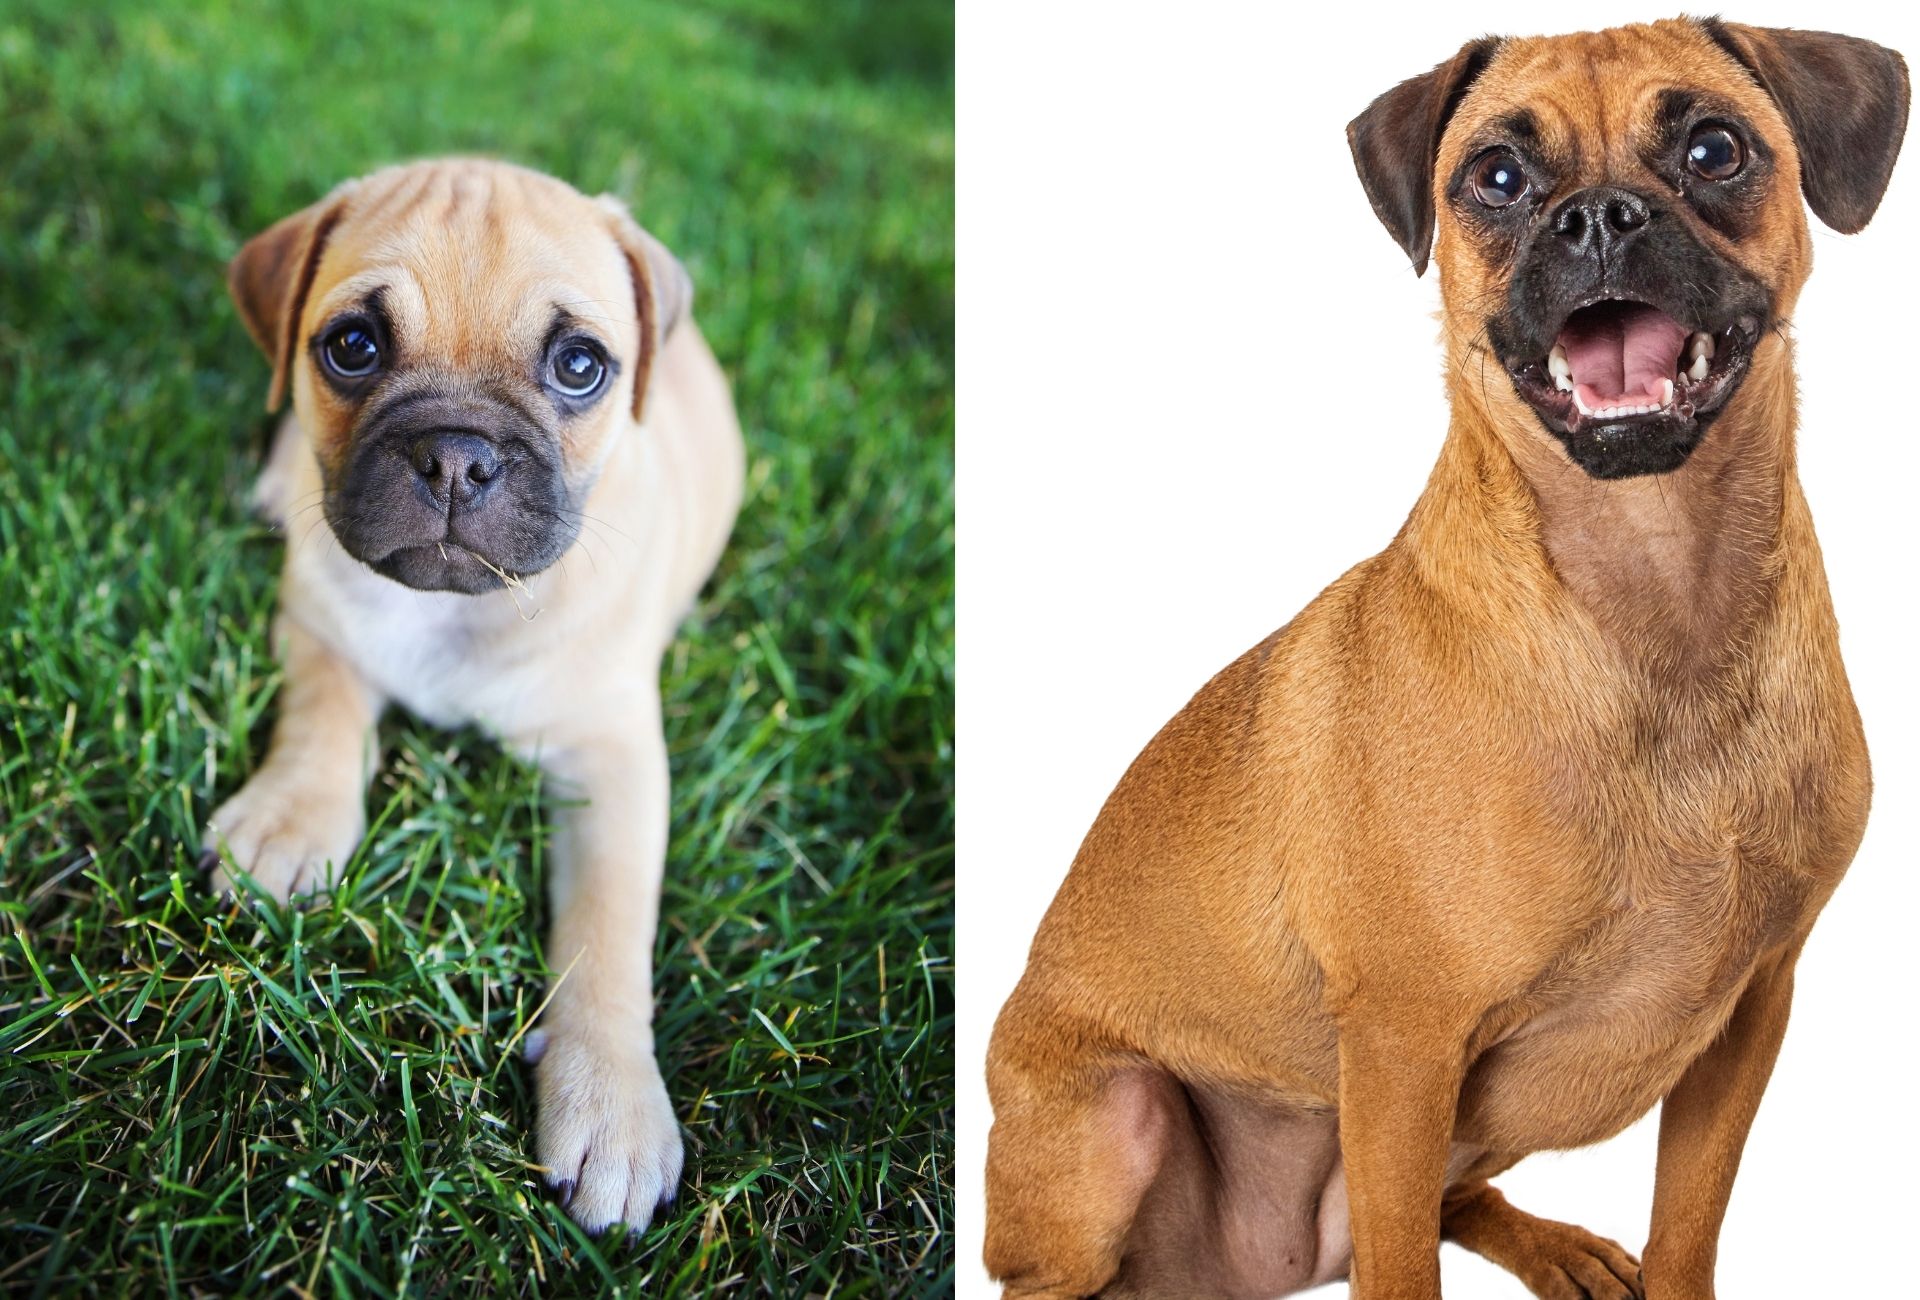 Retro Pug with potentially less health issues, one Chihuahua-Pug cross on the left and a Beagle Pug mix on the right.